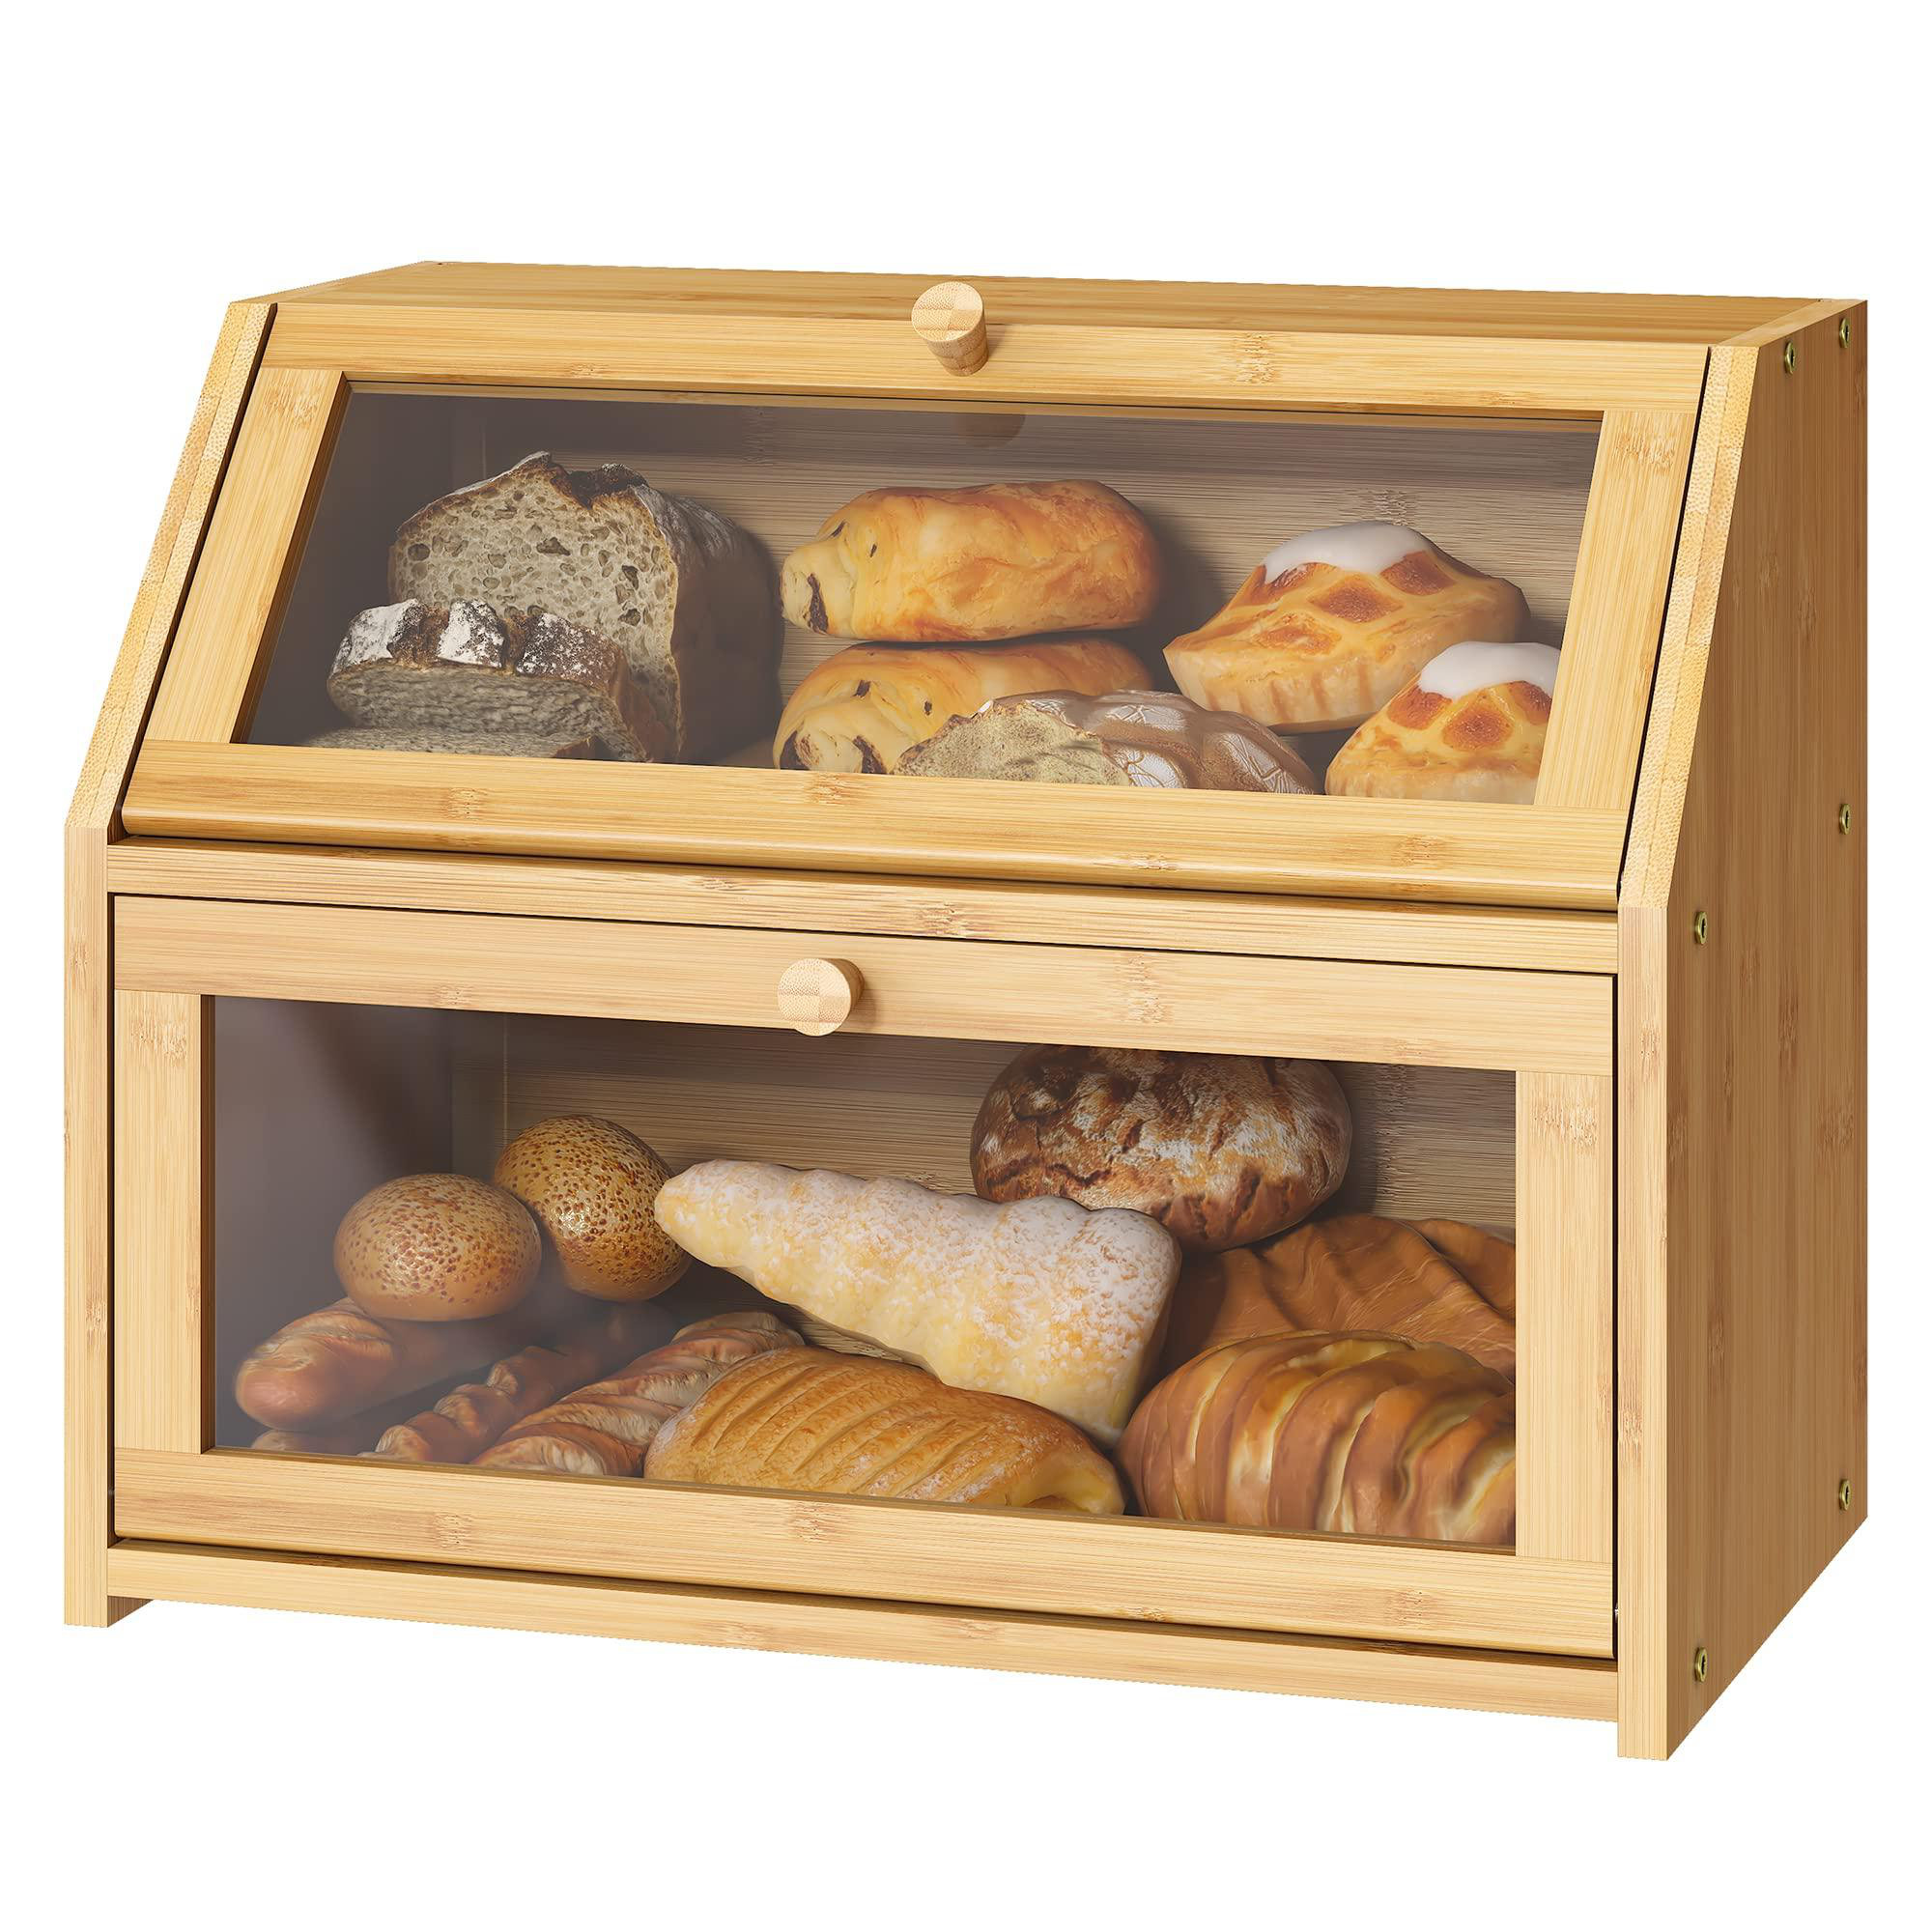 2 Pack Large Bread Box for Kitchen Countertop, Airtight Bread